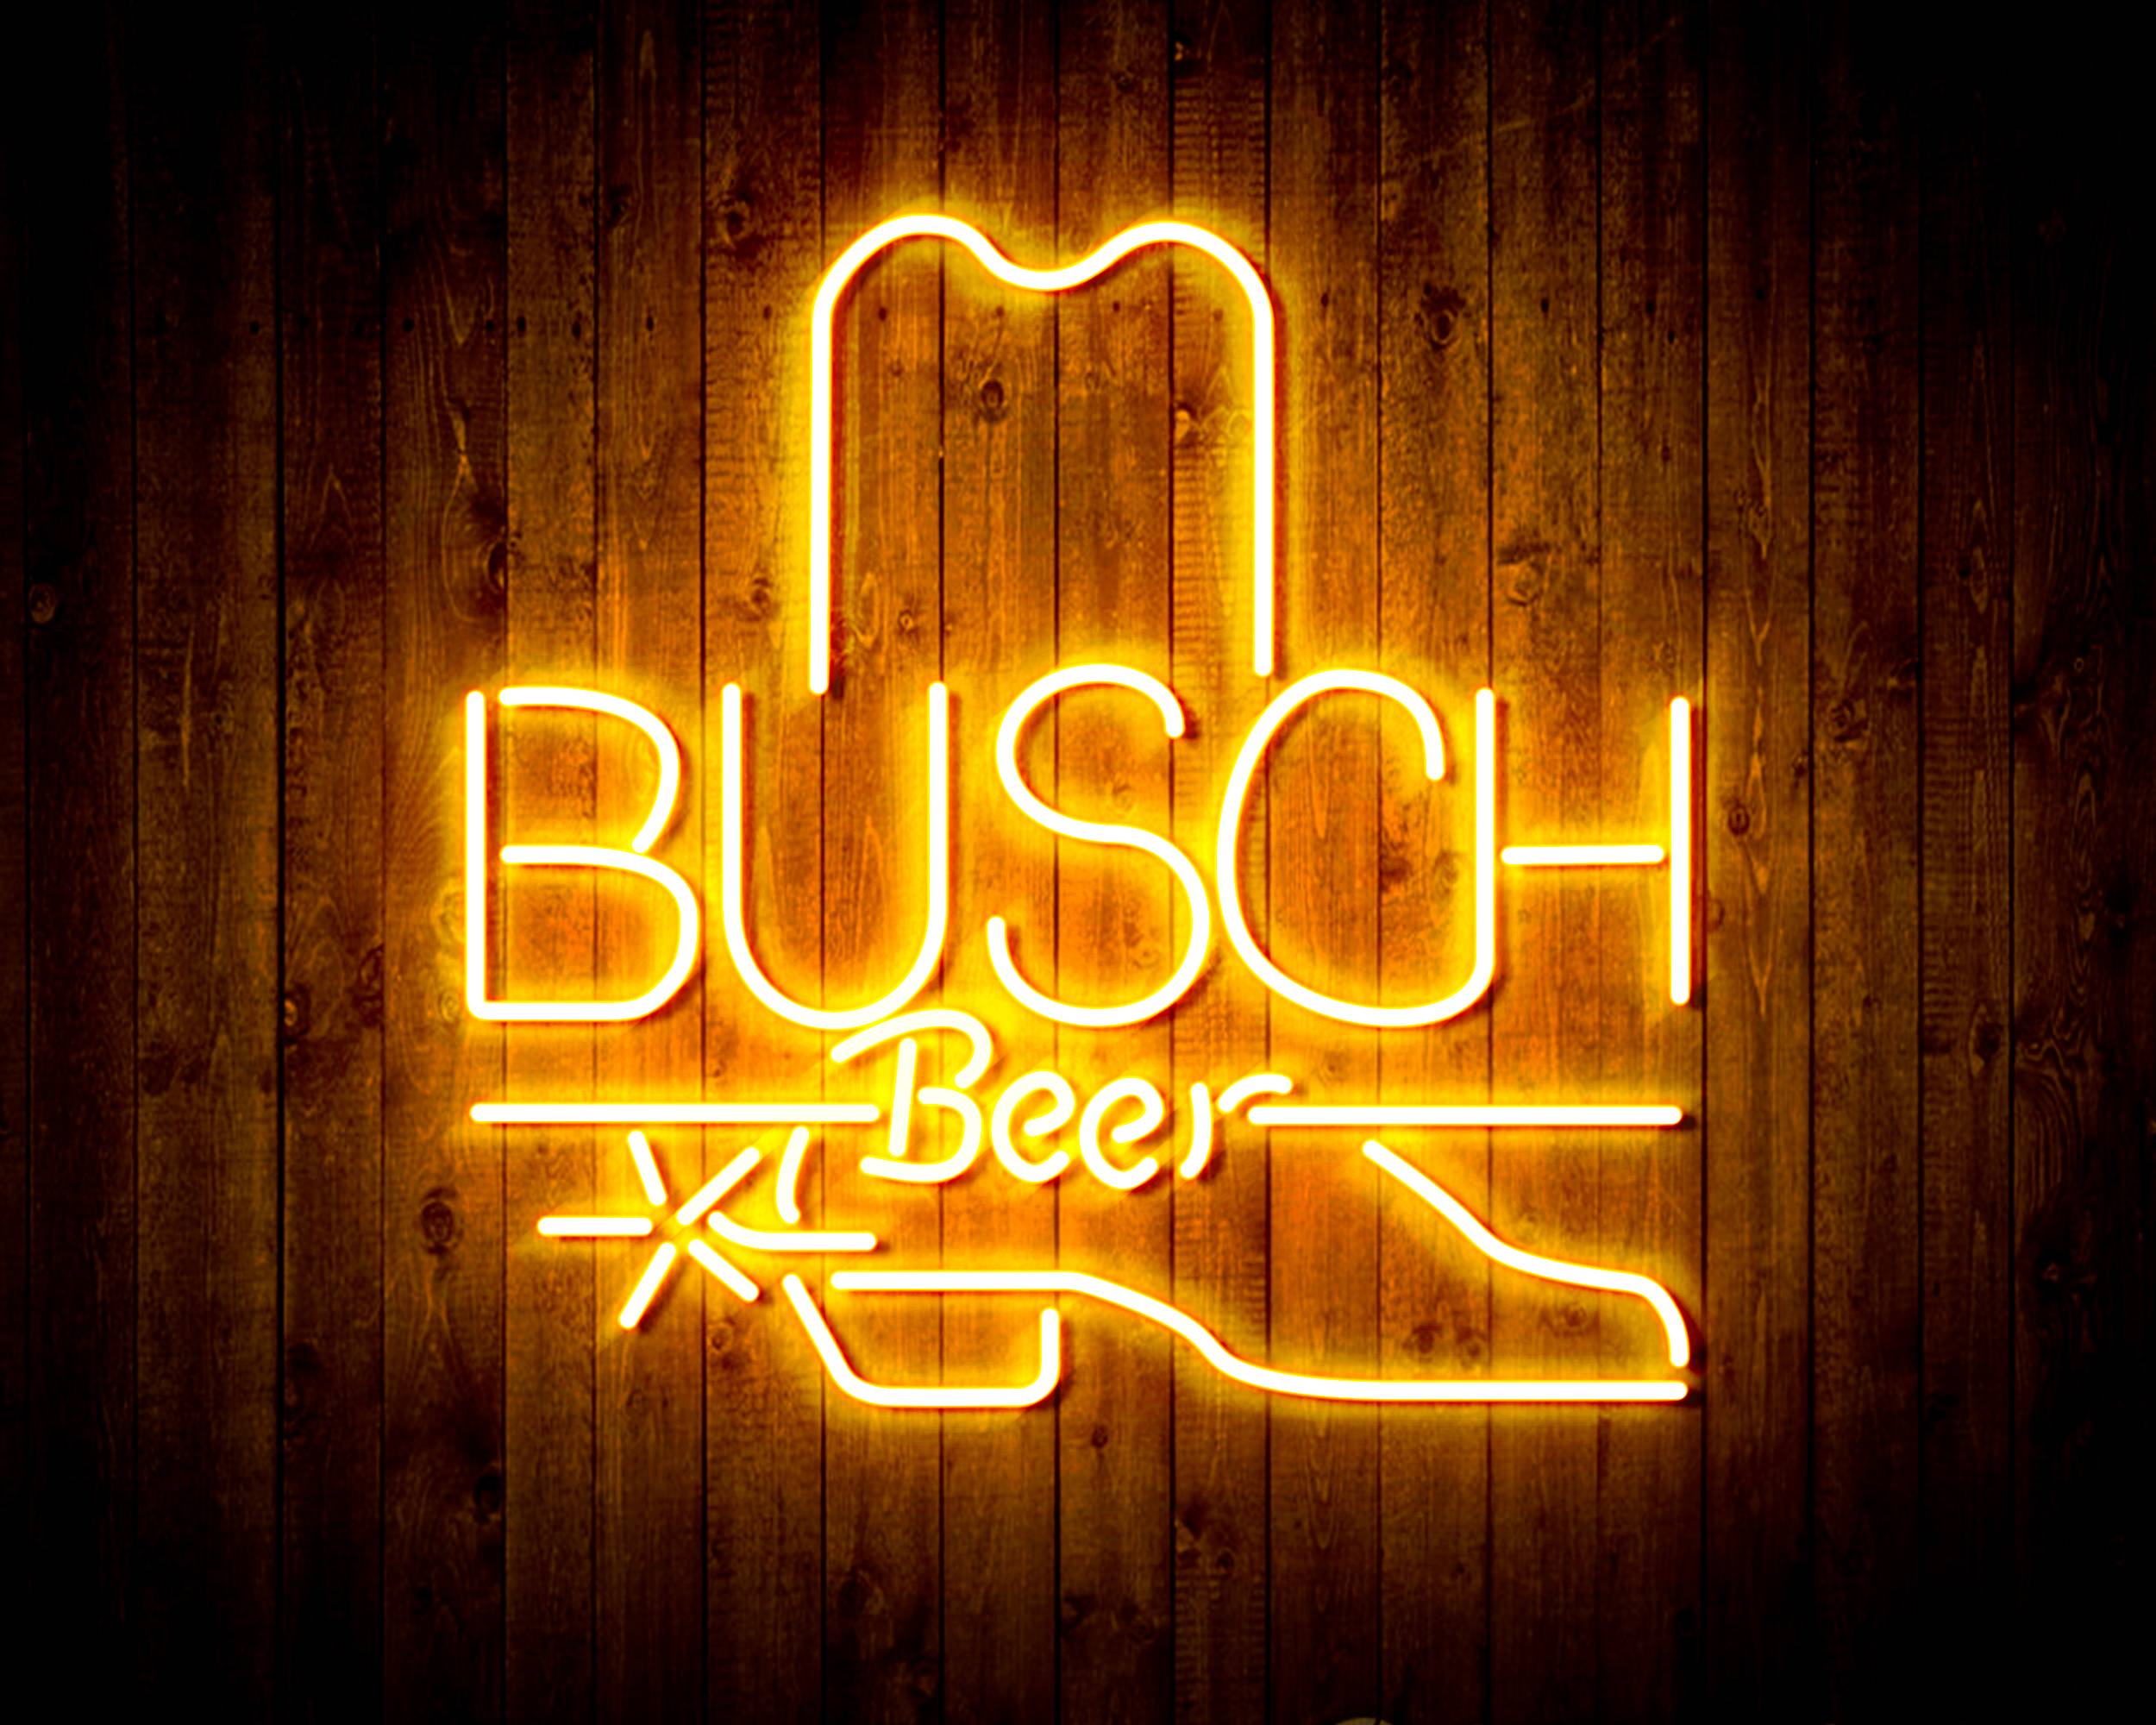 Busch Beer with Boot Handmade LED Neon Light Sign